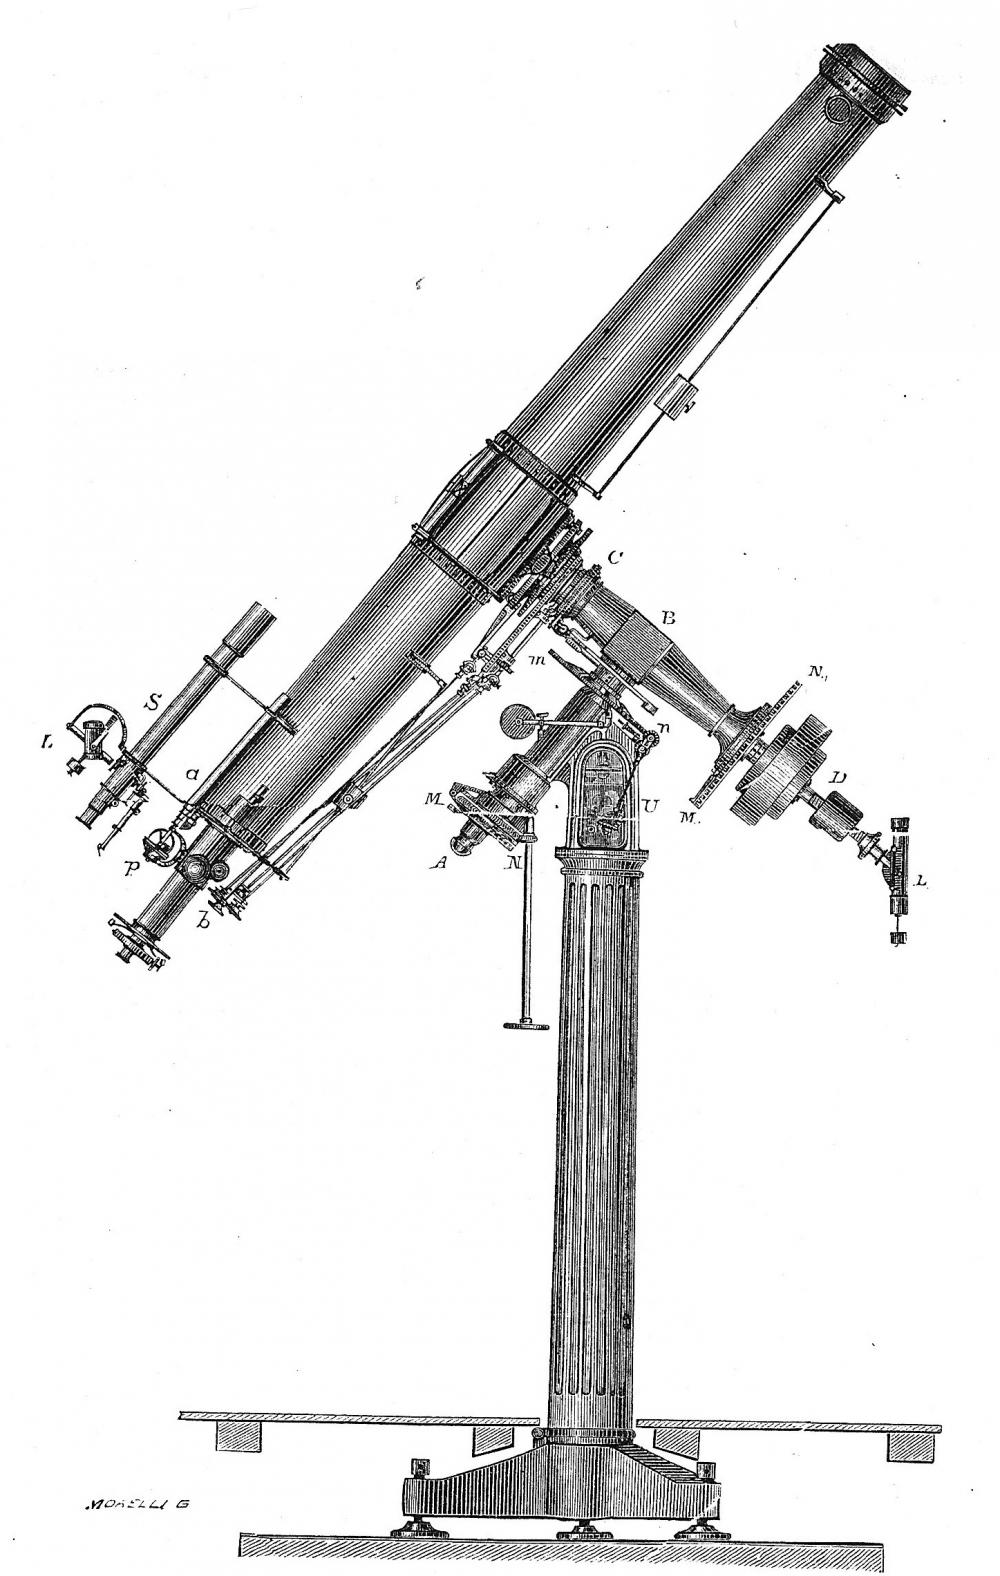 6-inch refractor, made by Merz of Munich, in O&rsq